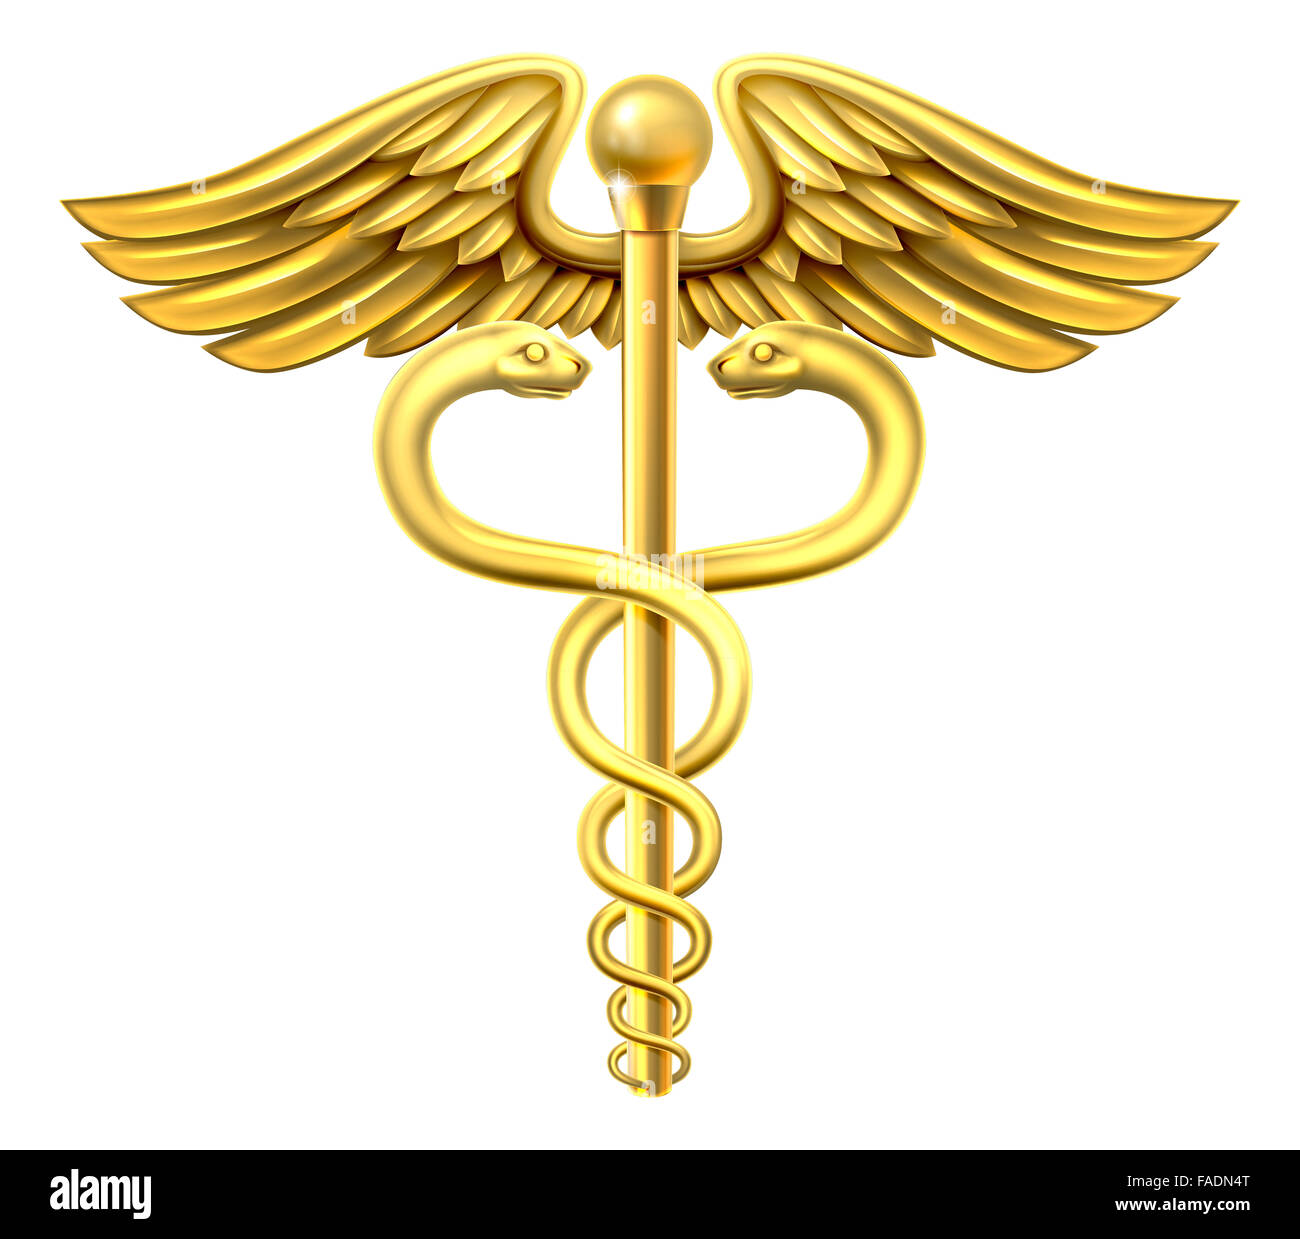 A gold caduceus medical symbol or symbol for commerce featuring intertwined snakes around a winged rod Stock Photo